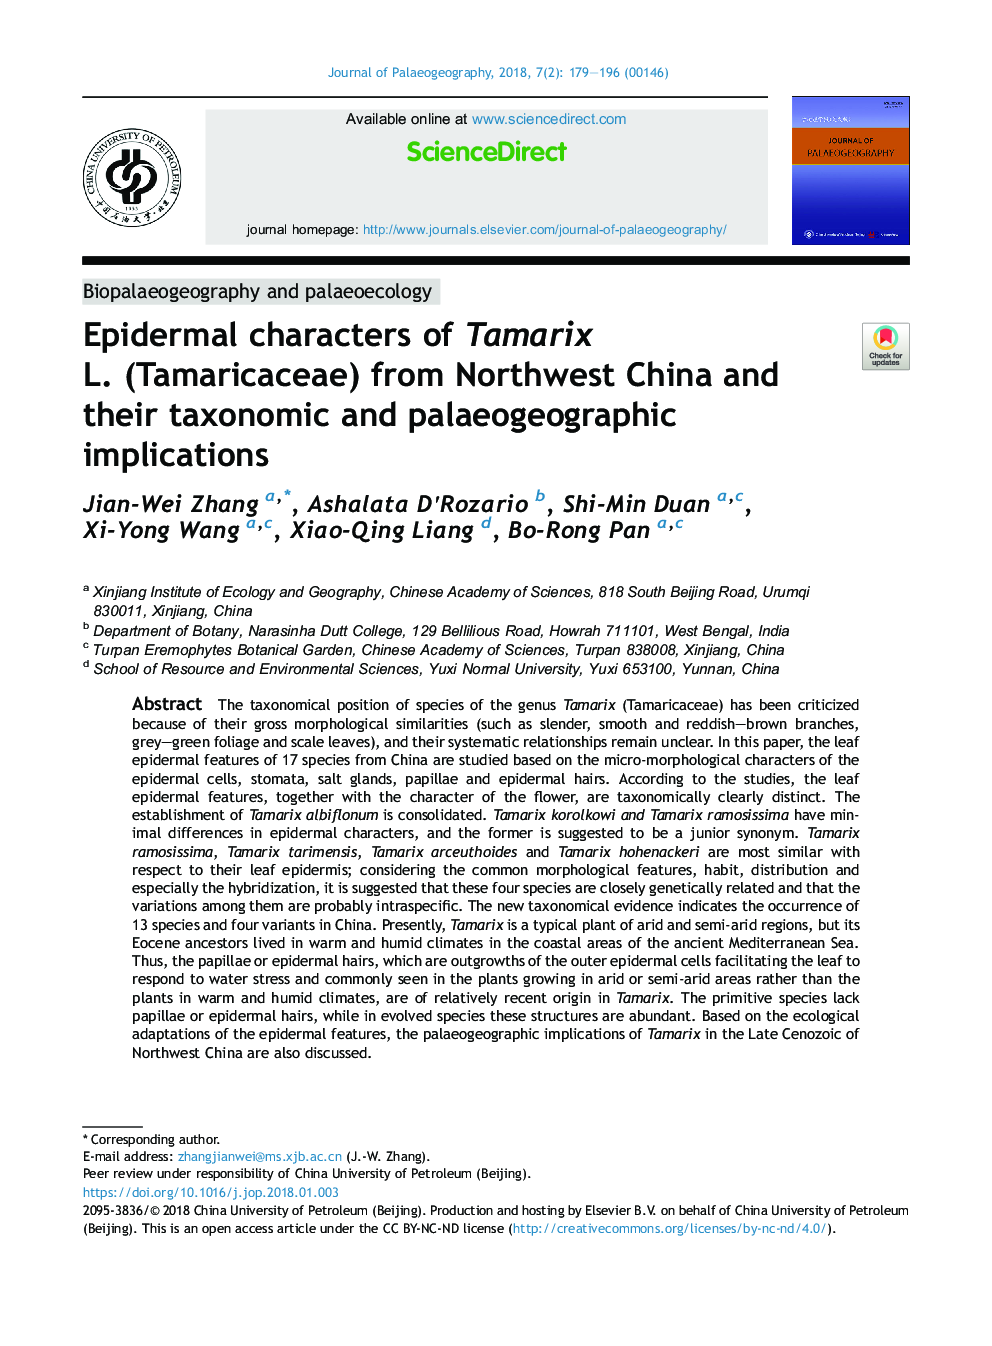 Epidermal characters of Tamarix L.Â (Tamaricaceae) from Northwest China and their taxonomic and palaeogeographic implications